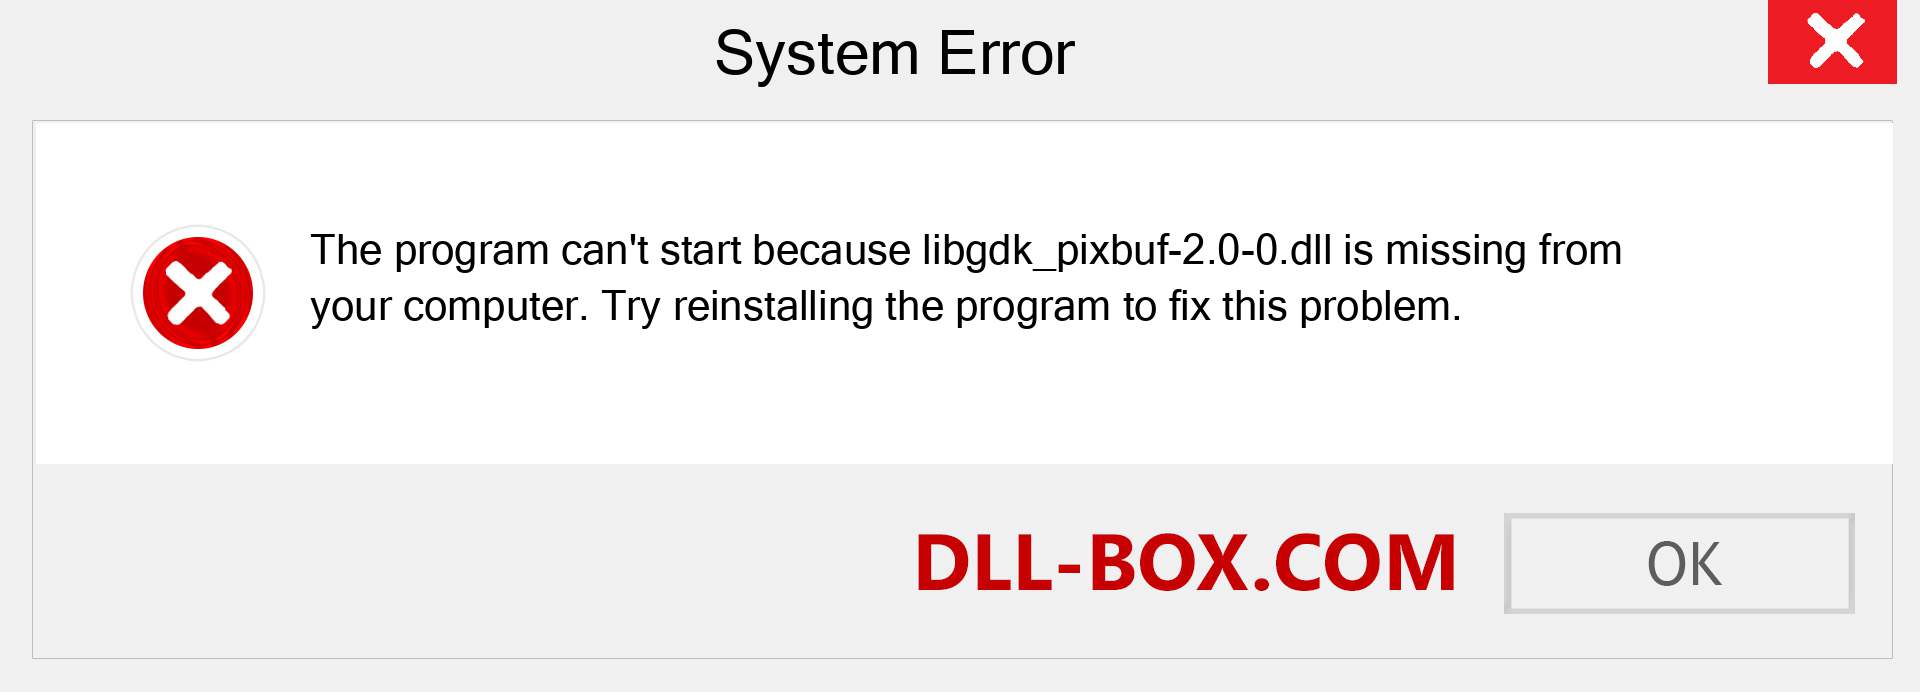  libgdk_pixbuf-2.0-0.dll file is missing?. Download for Windows 7, 8, 10 - Fix  libgdk_pixbuf-2.0-0 dll Missing Error on Windows, photos, images